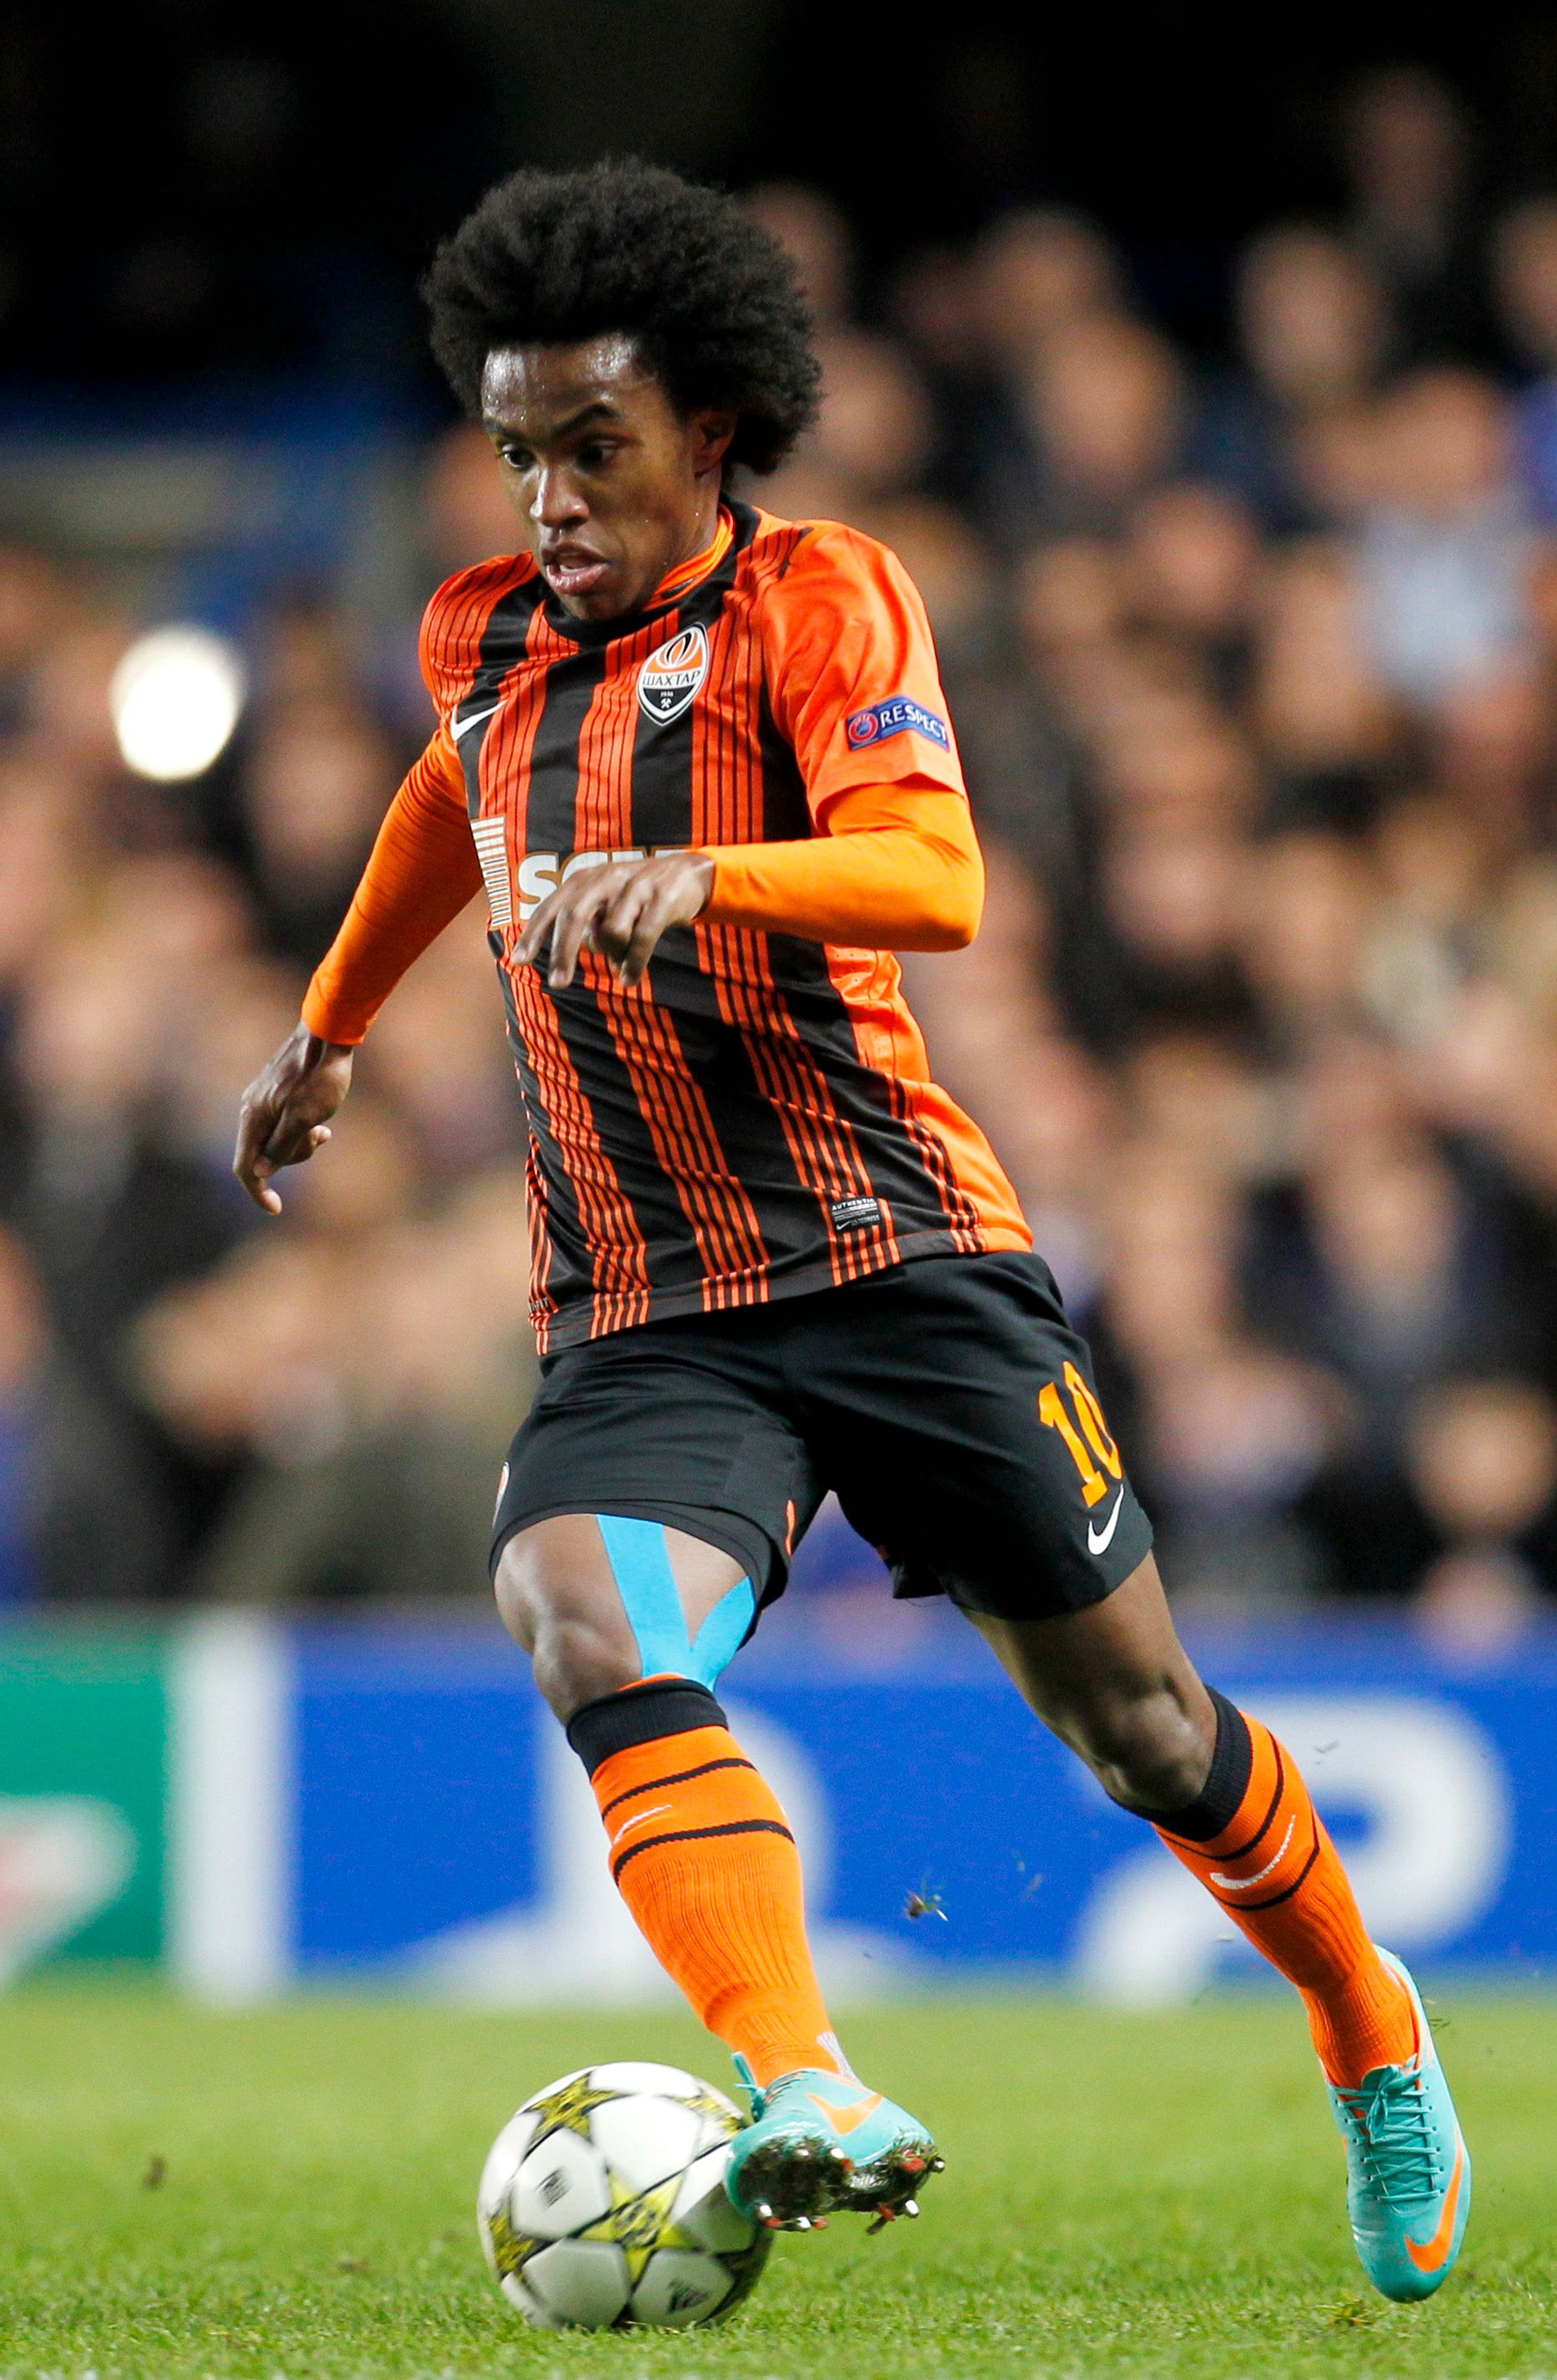 Willian on the ball for Shakhtar.